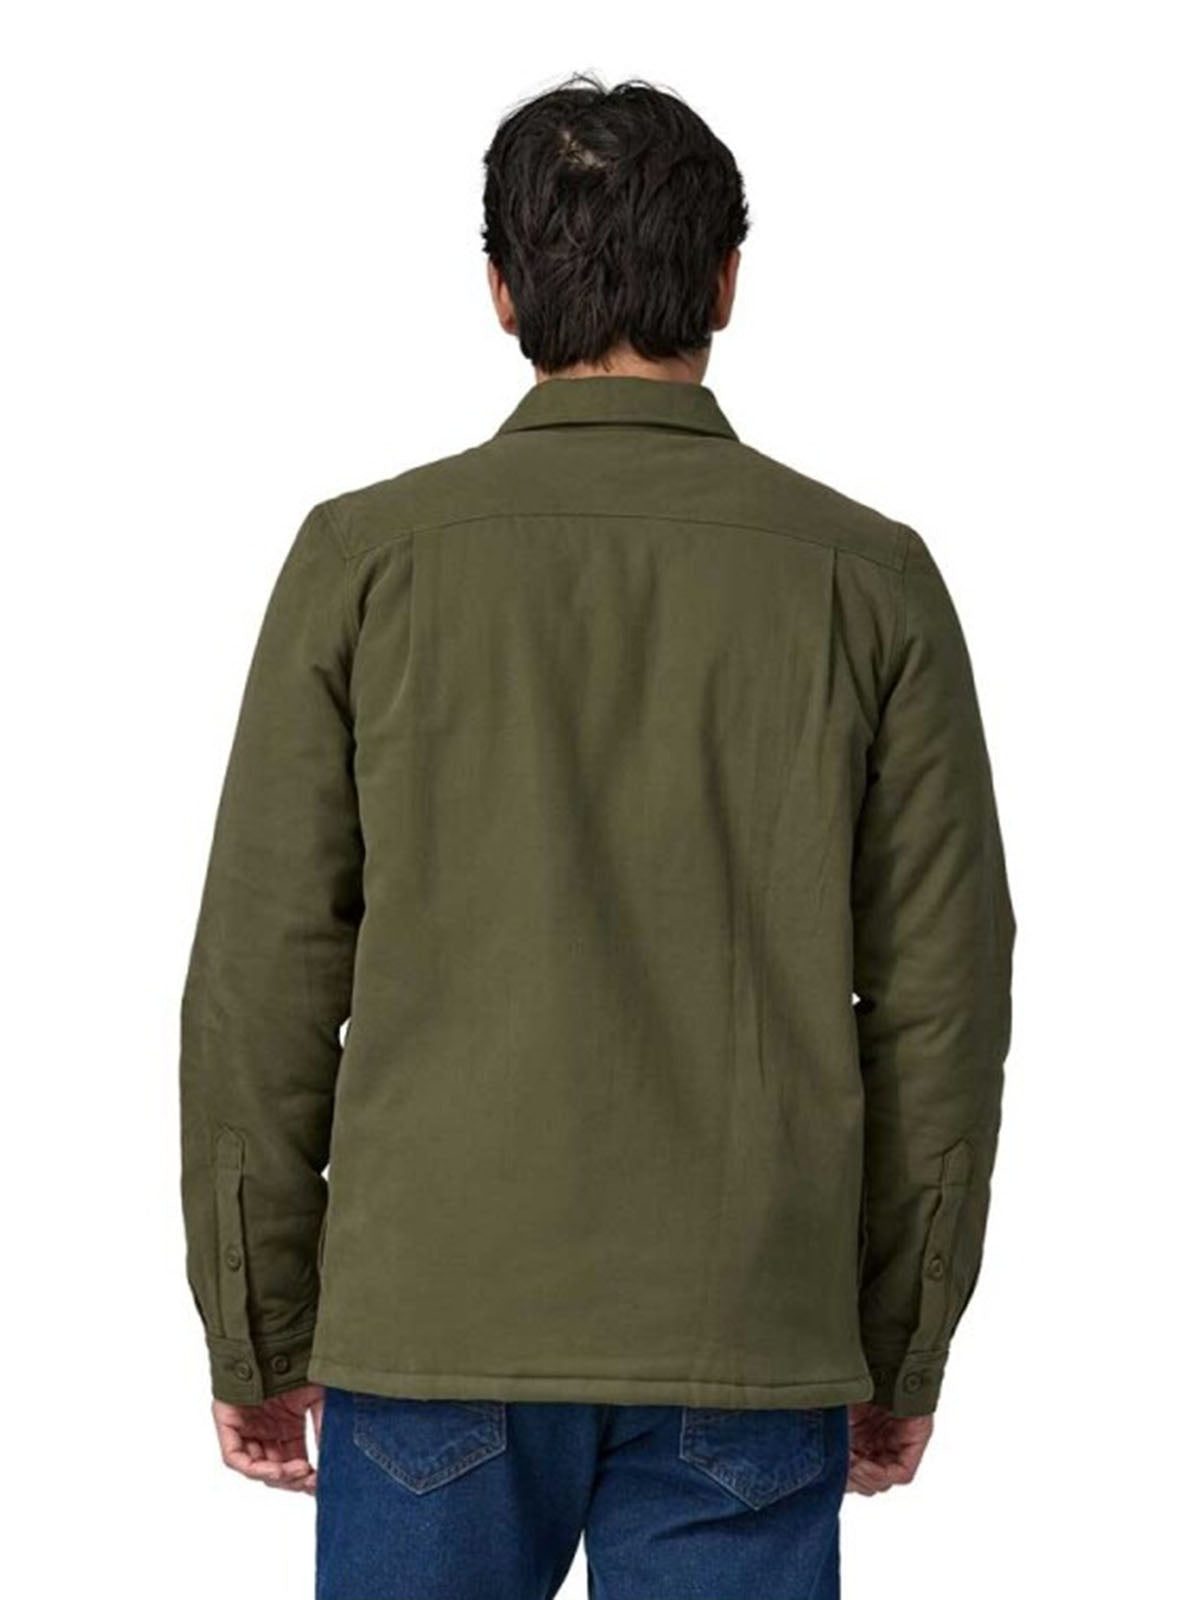 Giacche Uomo Patagonia - Insulated Organic Cotton Midweight Fjord Shirt - Verde